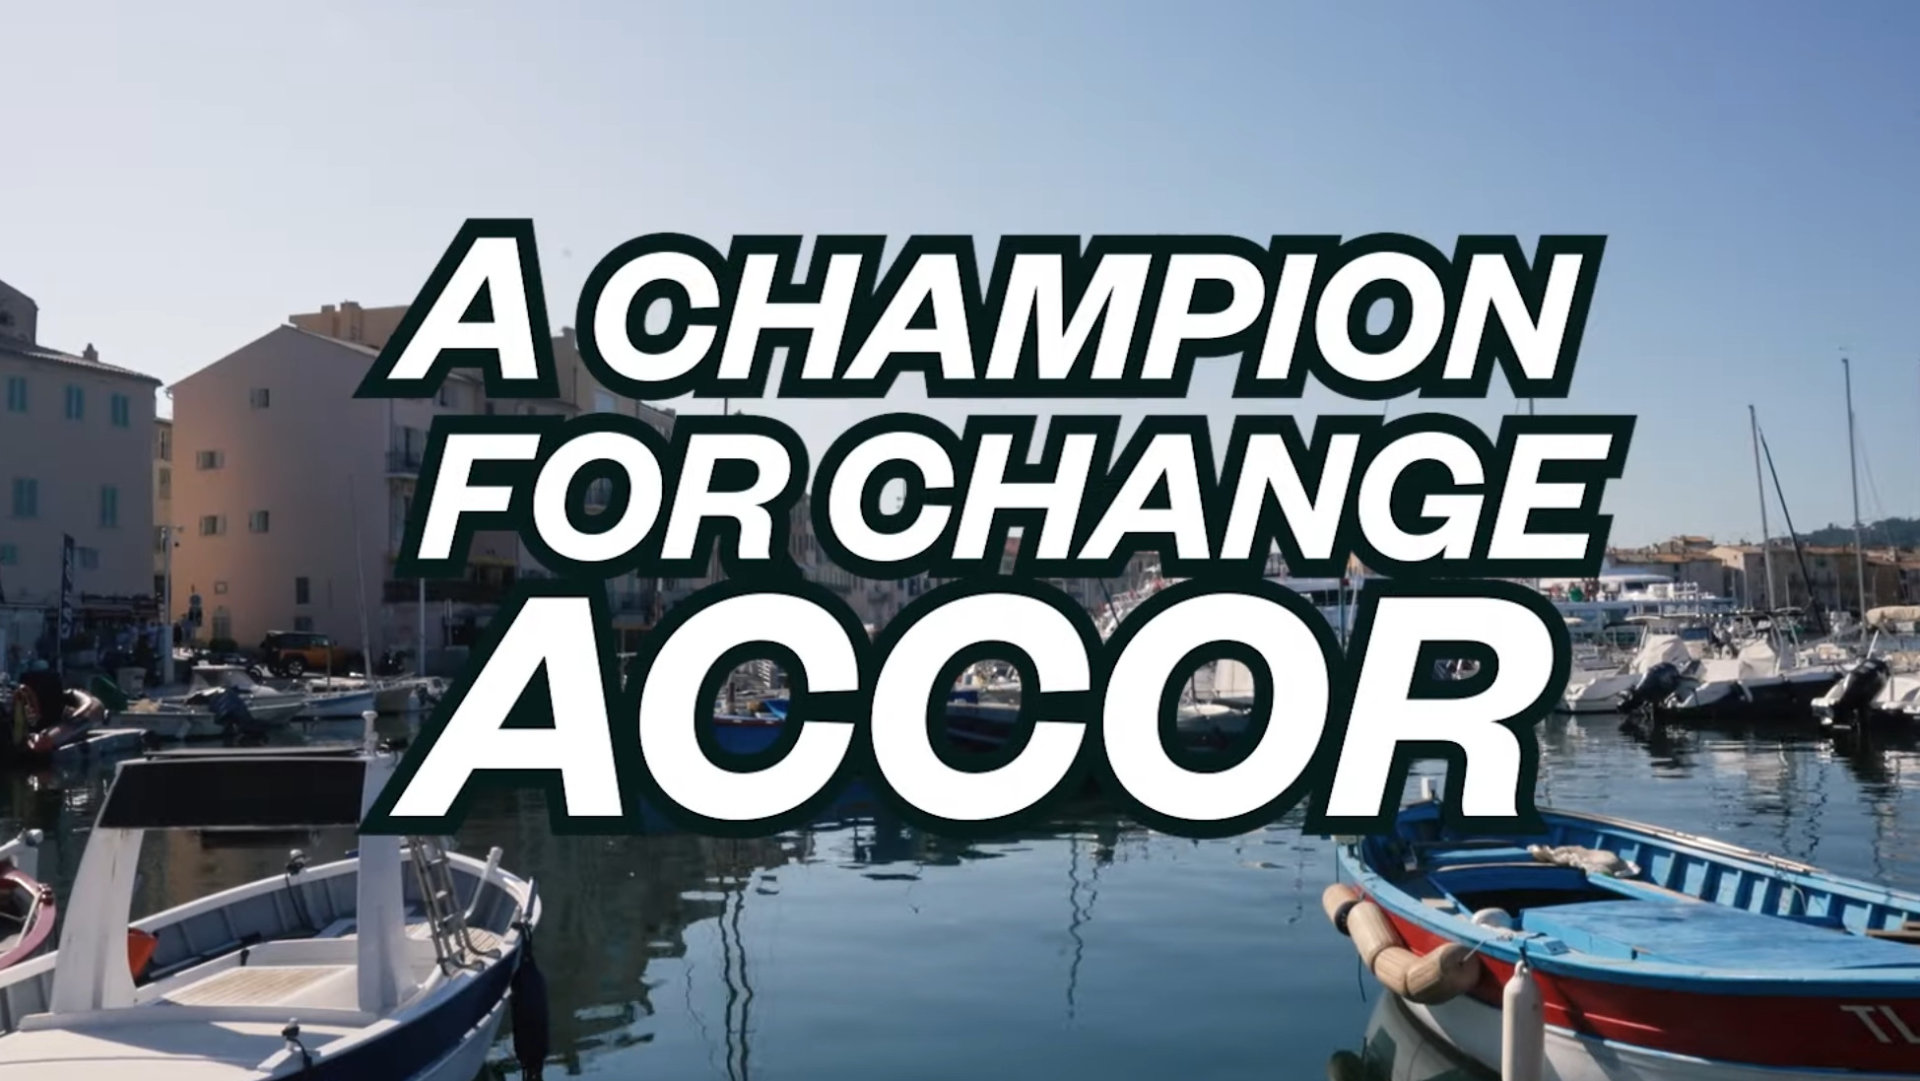 Episode 1: Champions for Change - Accor